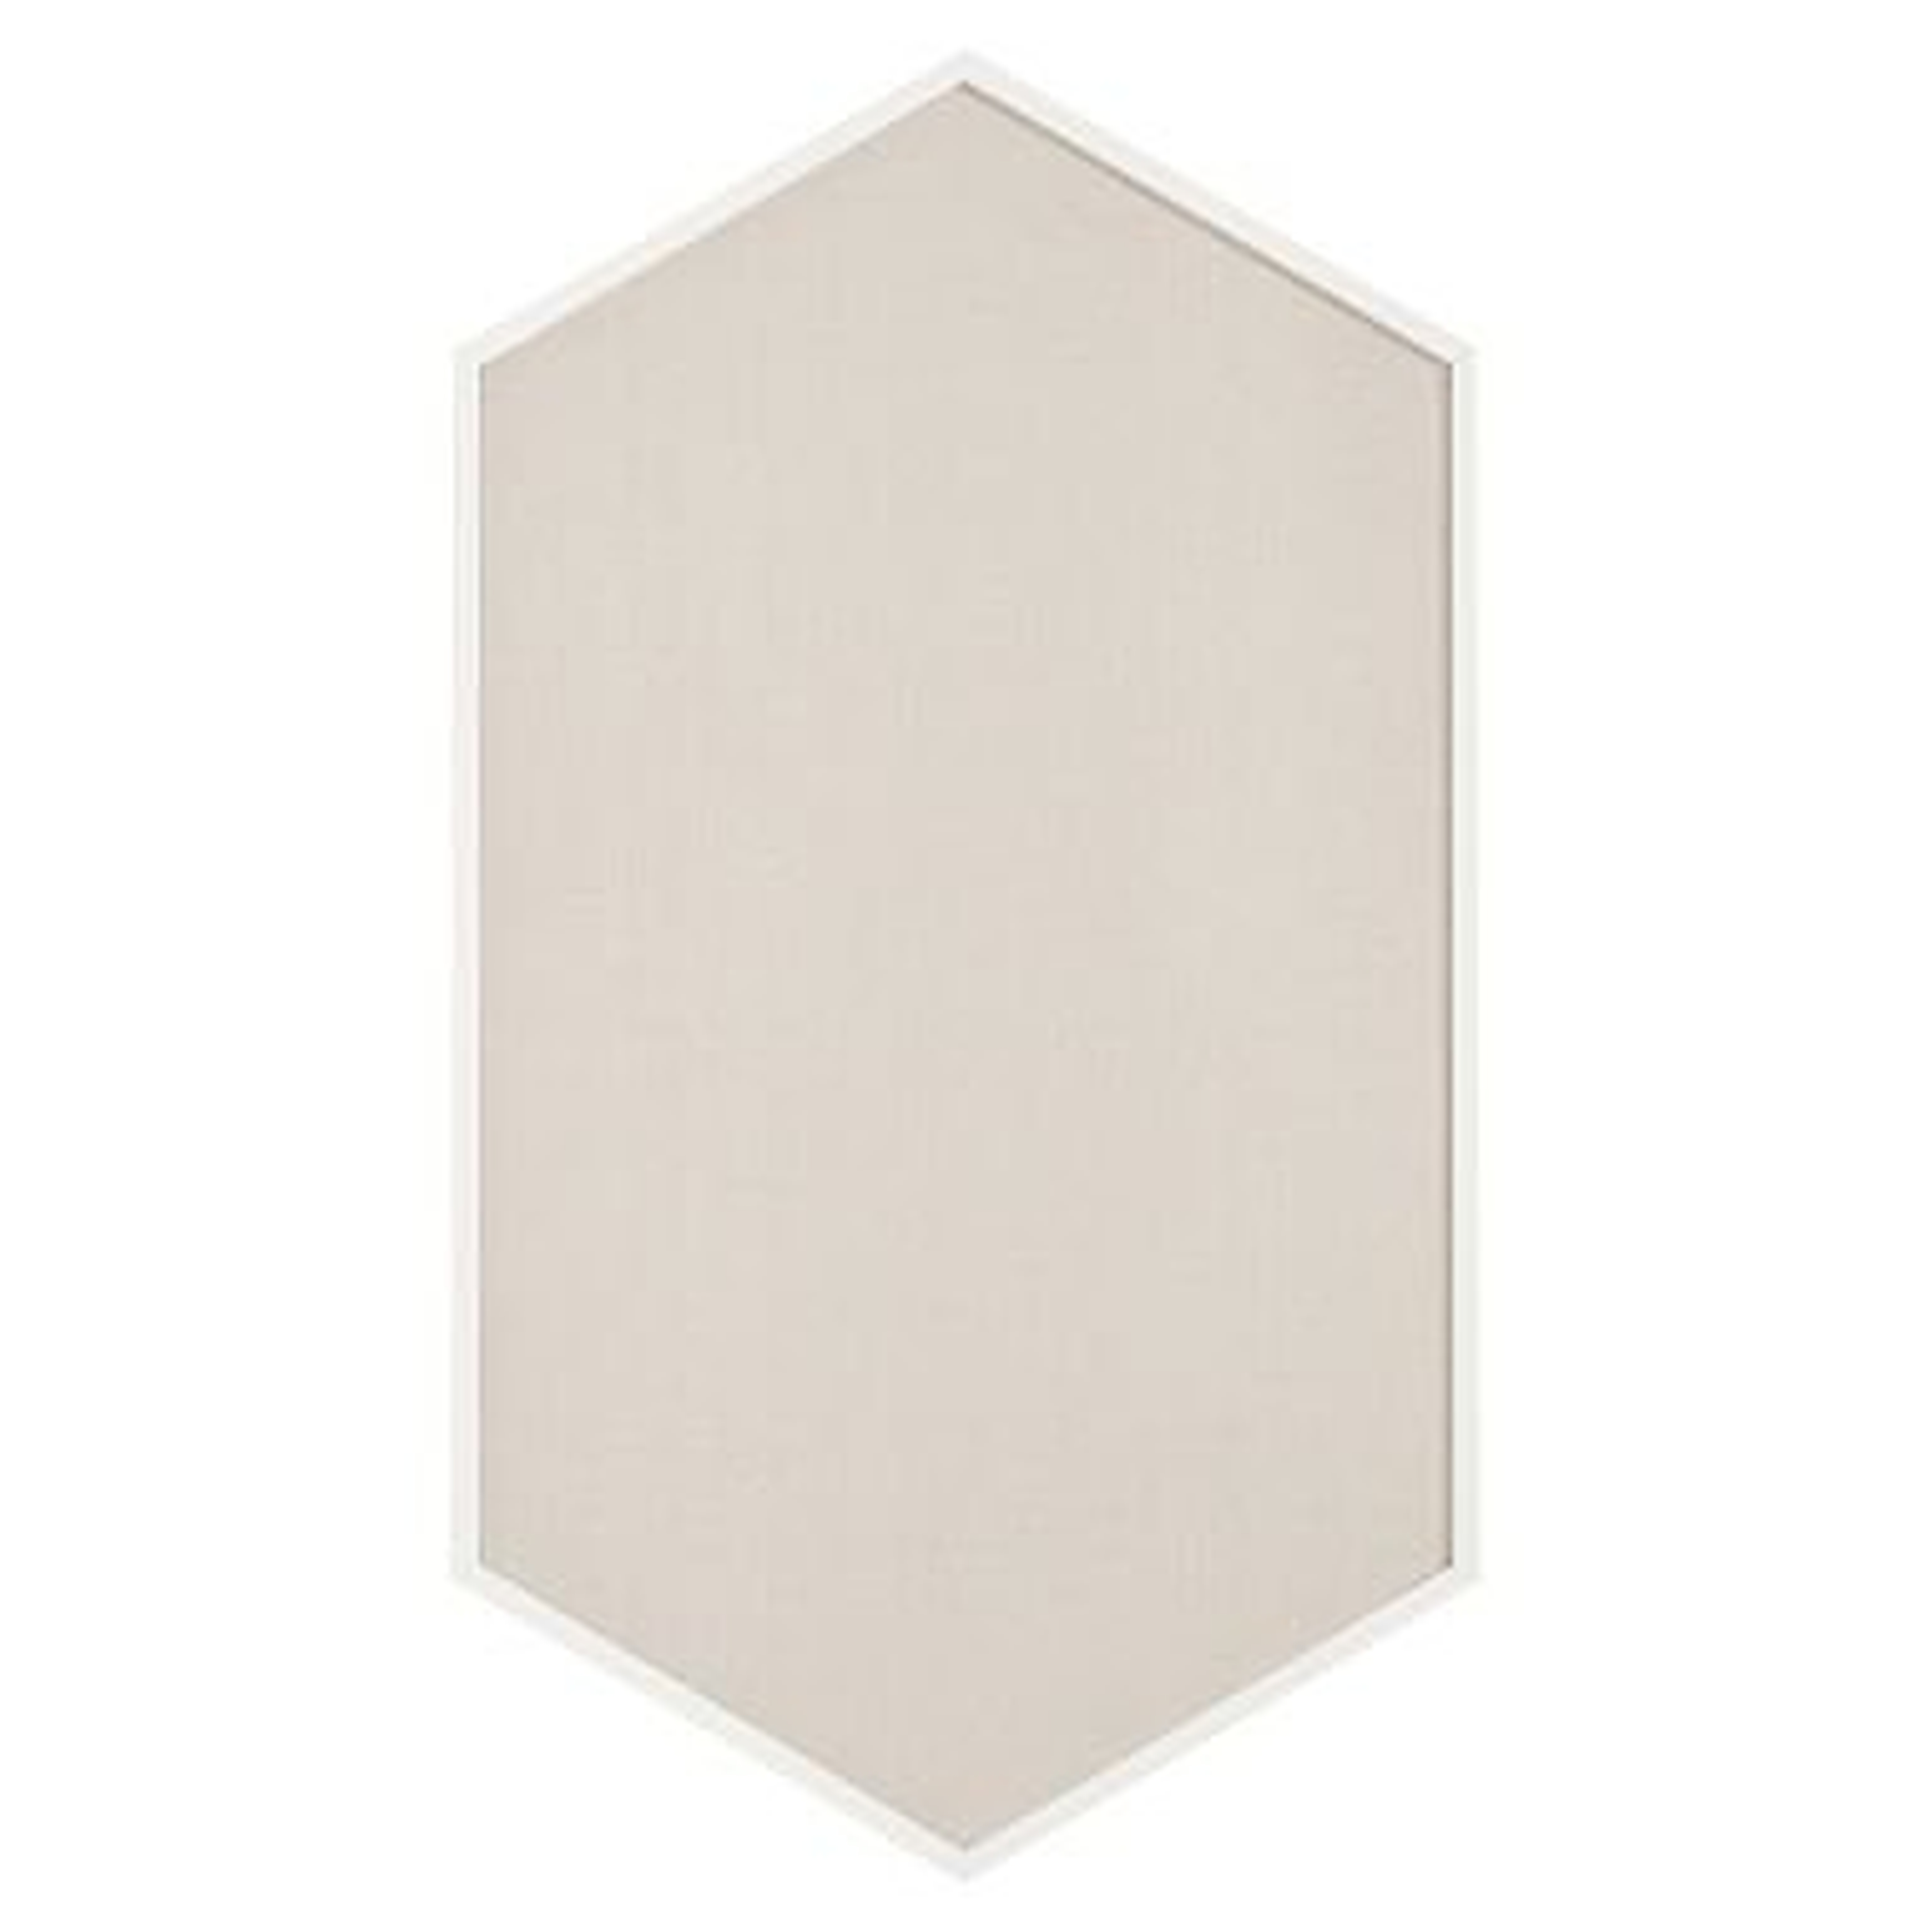 Wood Framed Hexagon Pinboard, Simply White - Pottery Barn Teen